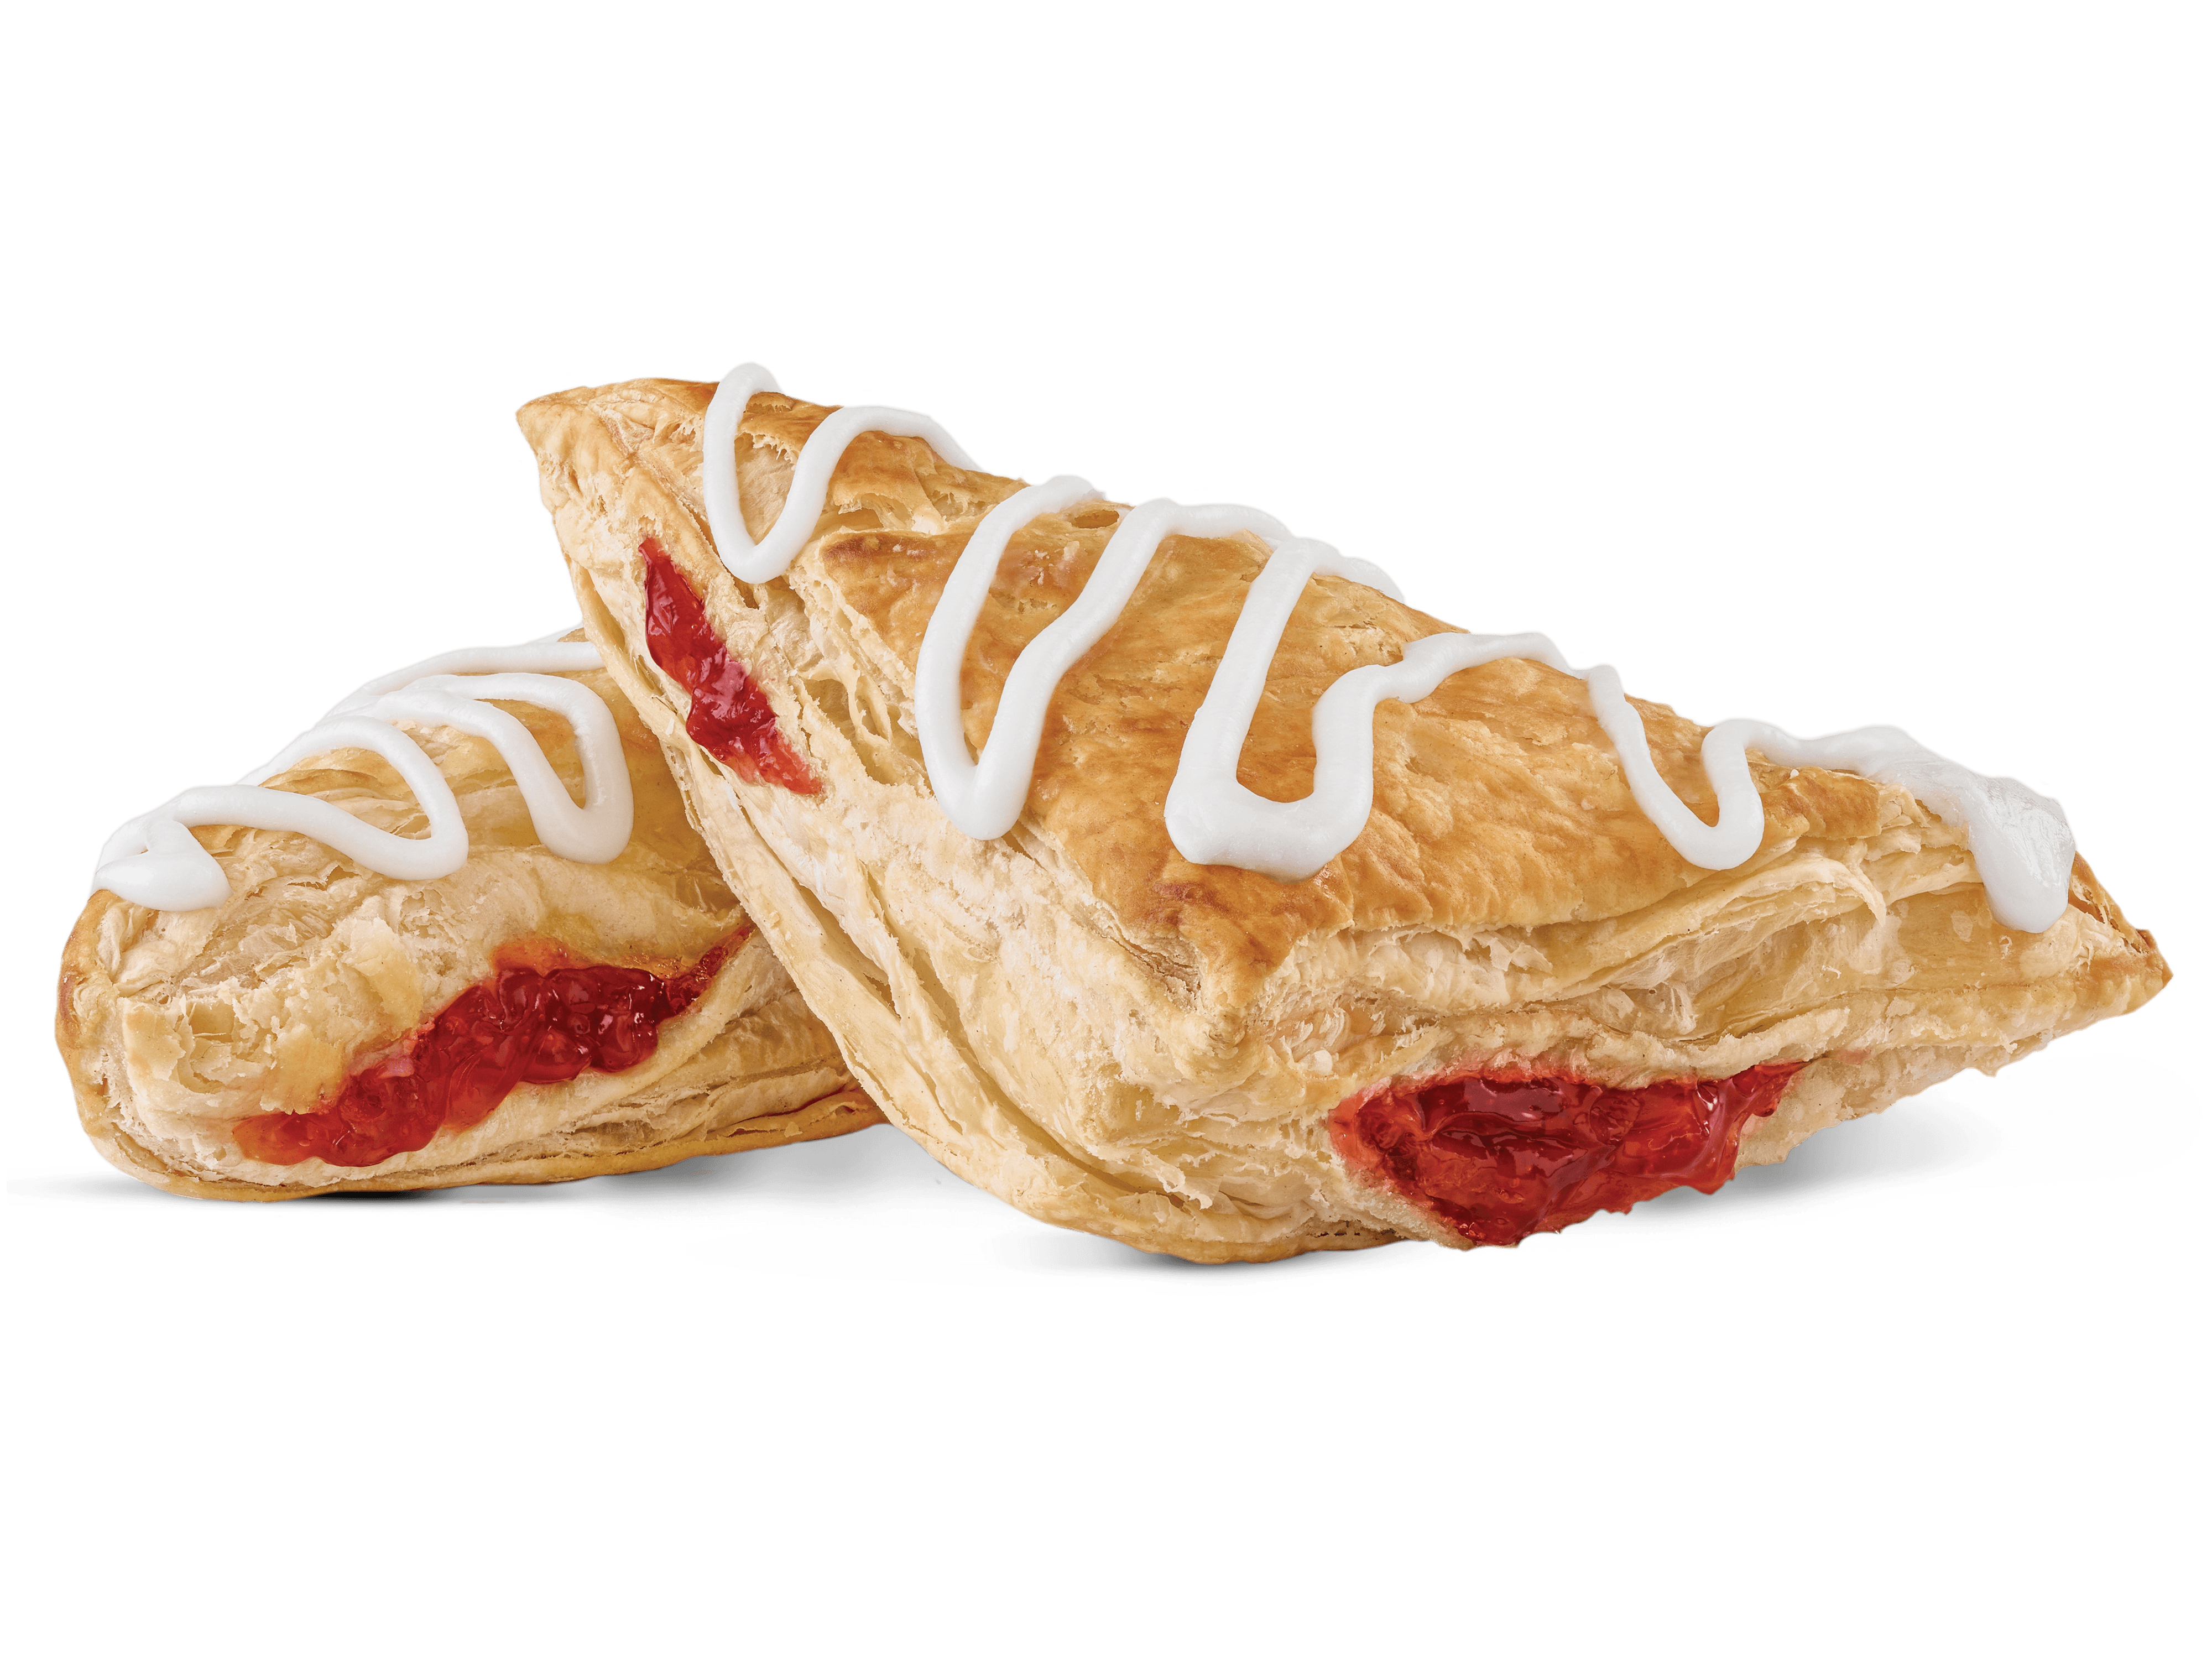 Calories in Arby's Cherry Turnover